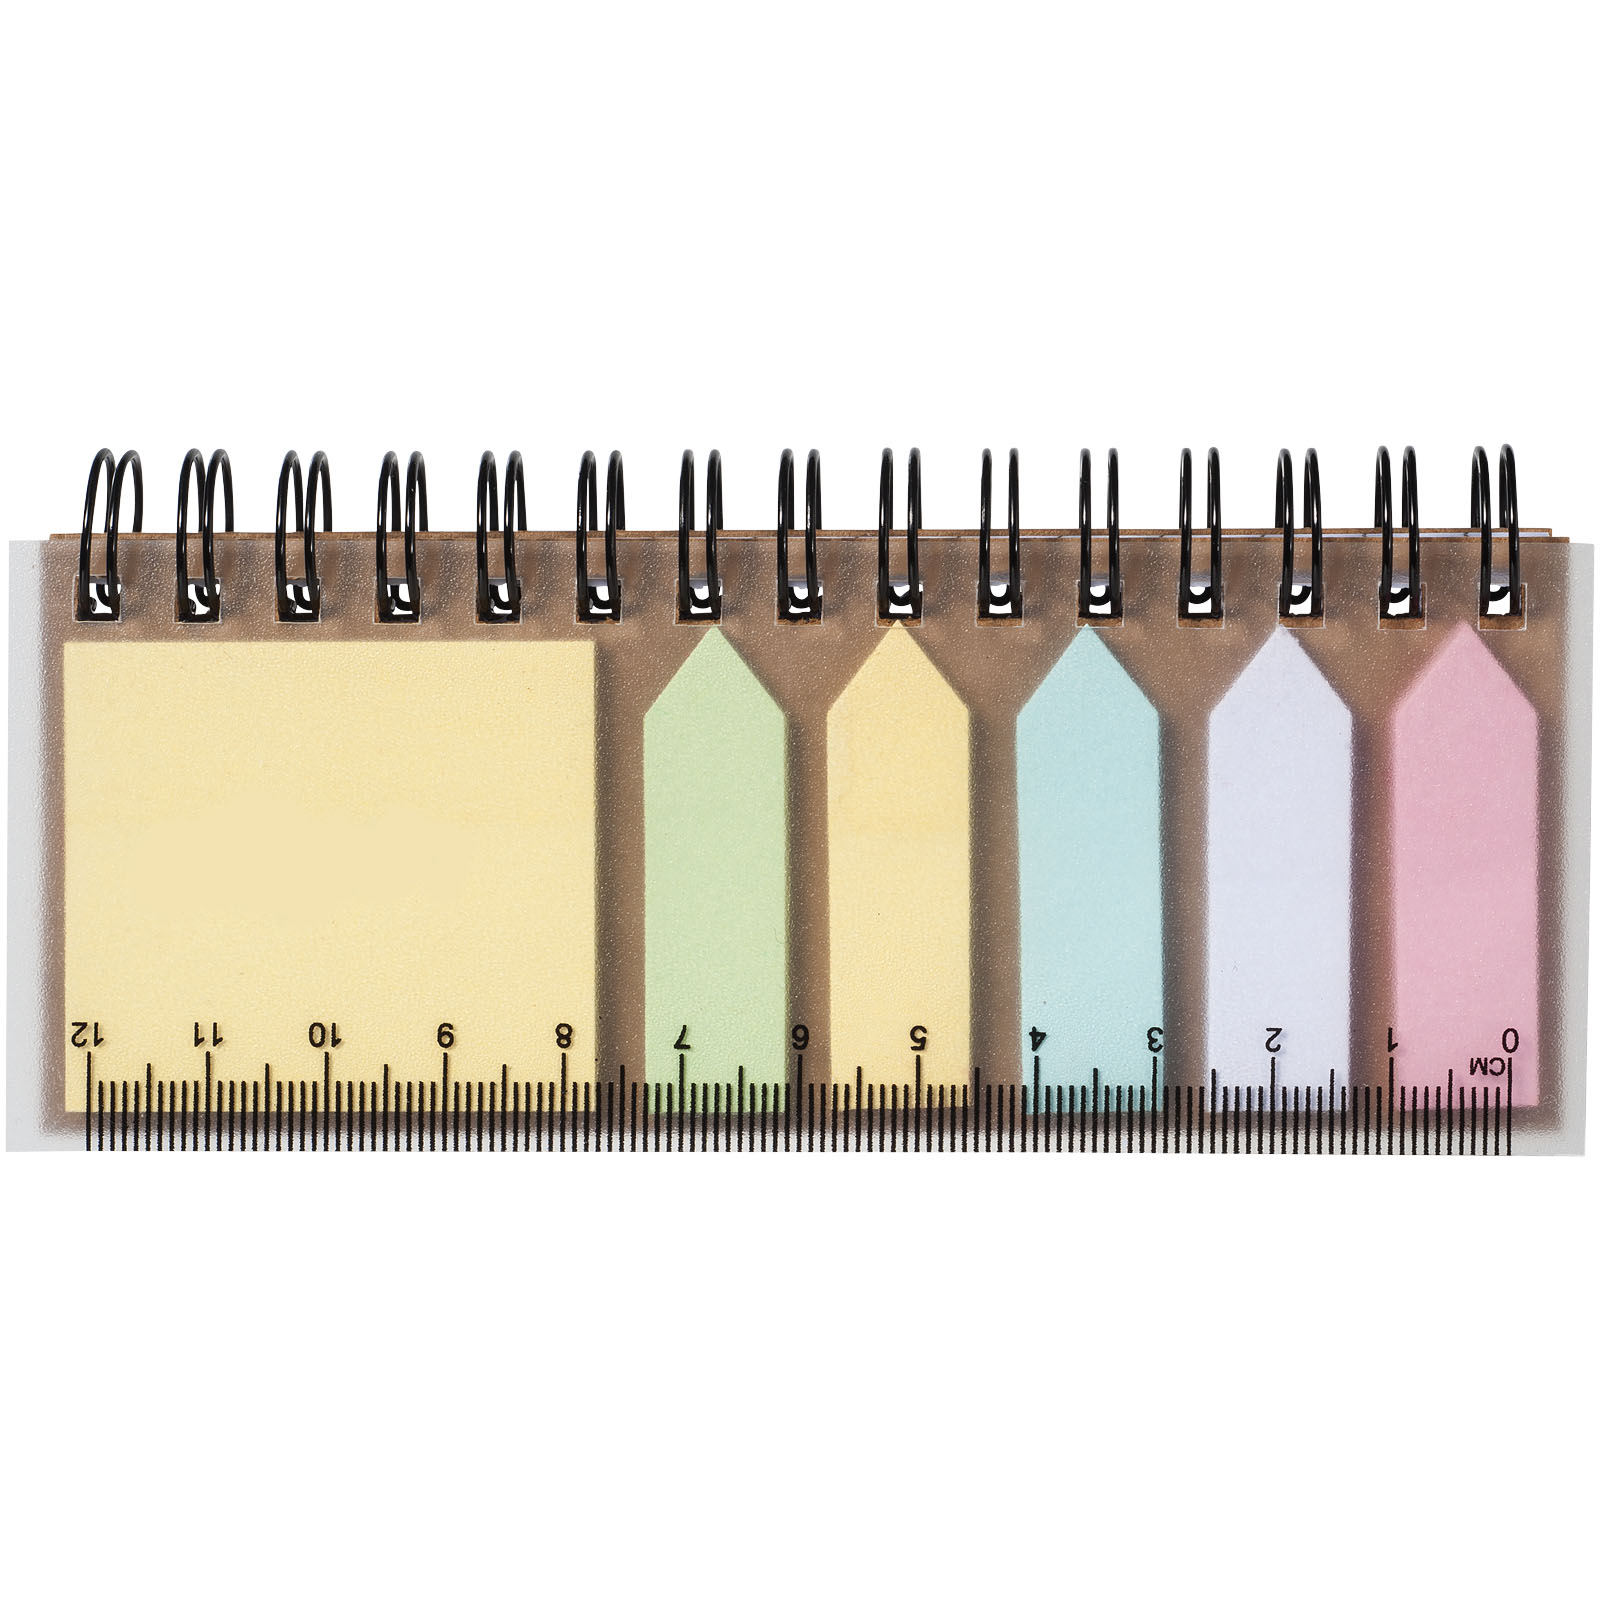 Advertising Soft cover notebooks - Spinner spiral notebook with coloured sticky notes - 1